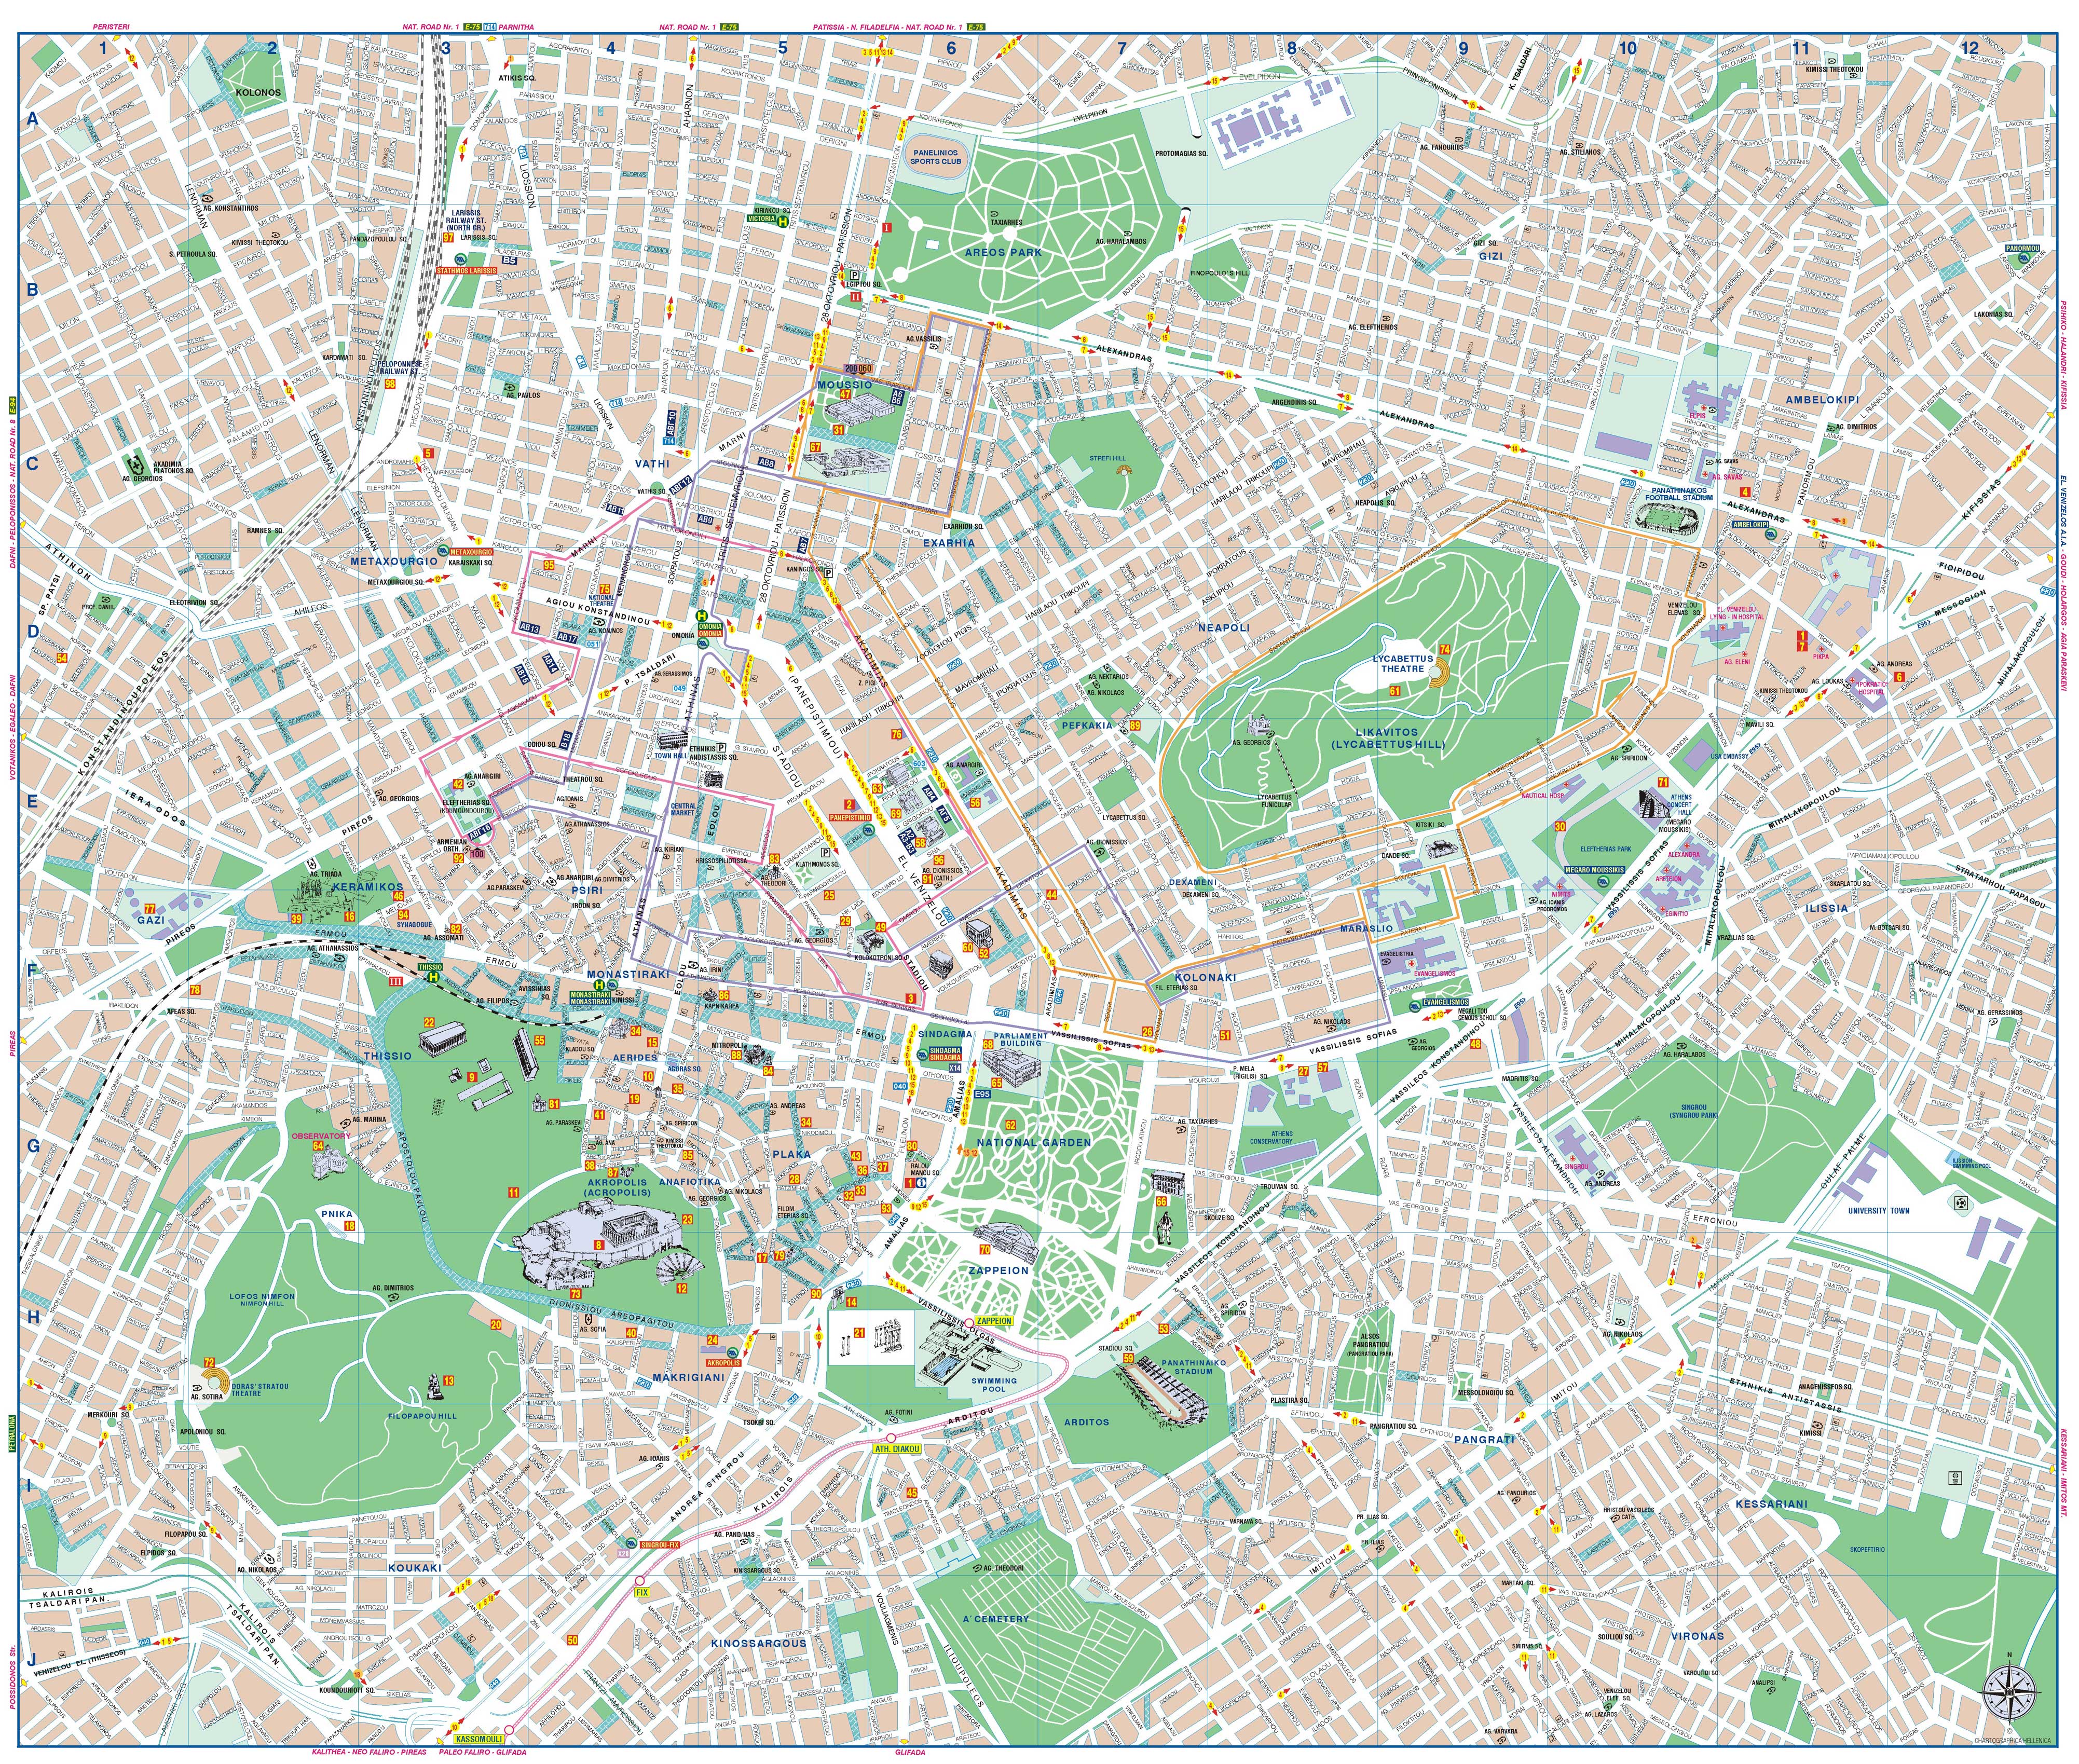 Large Athens Maps for Free Download | High-Resolution and Detailed ...